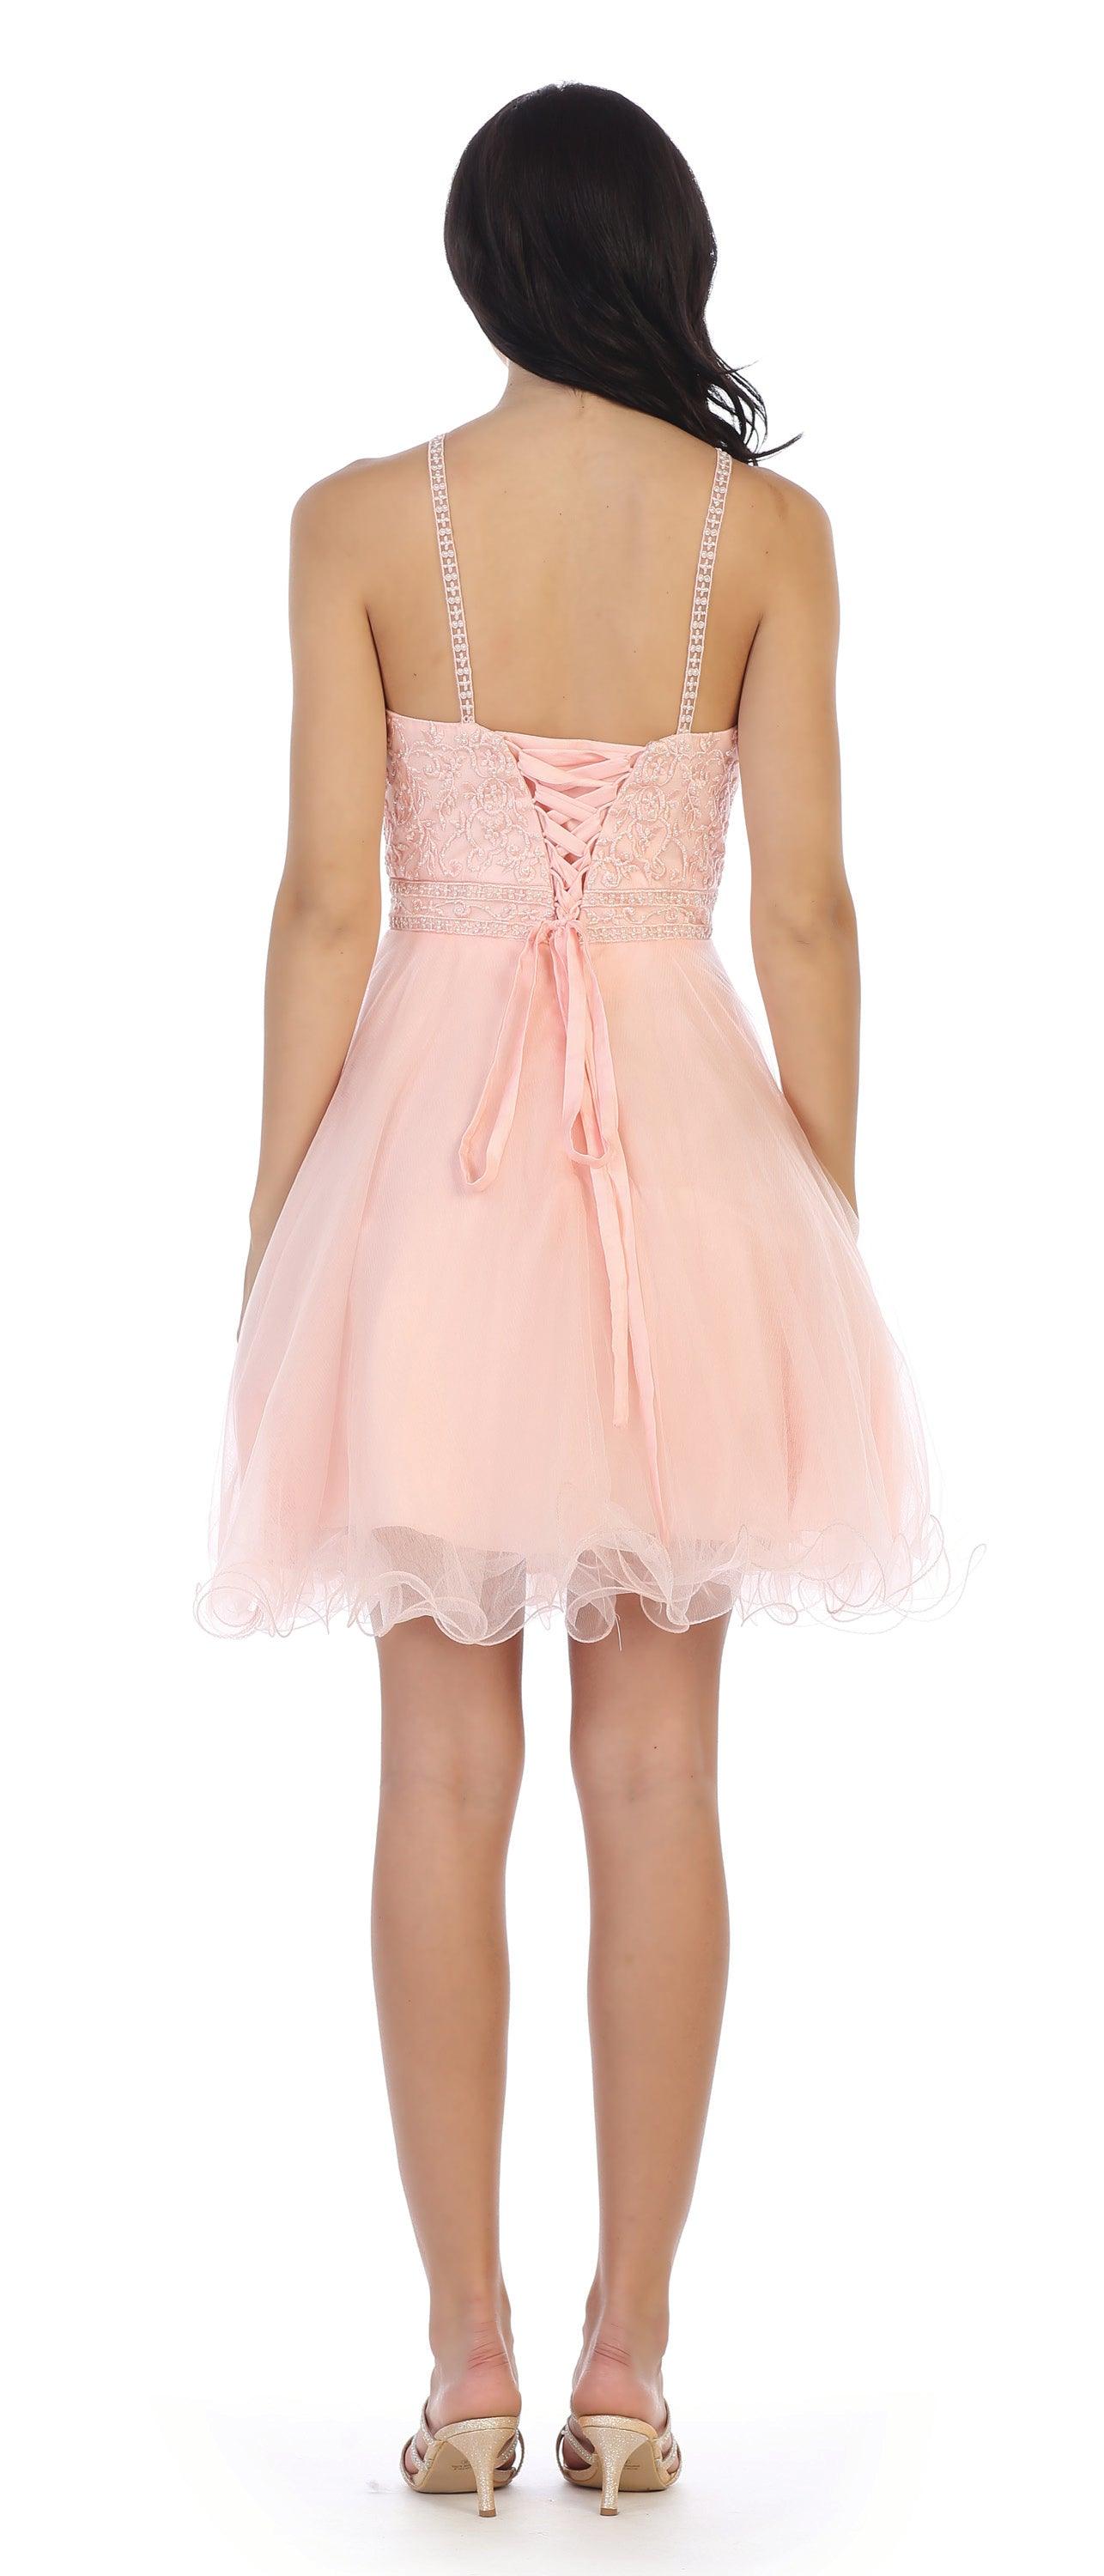 Prom Short Halter Homecoming Cocktail Dress - The Dress Outlet